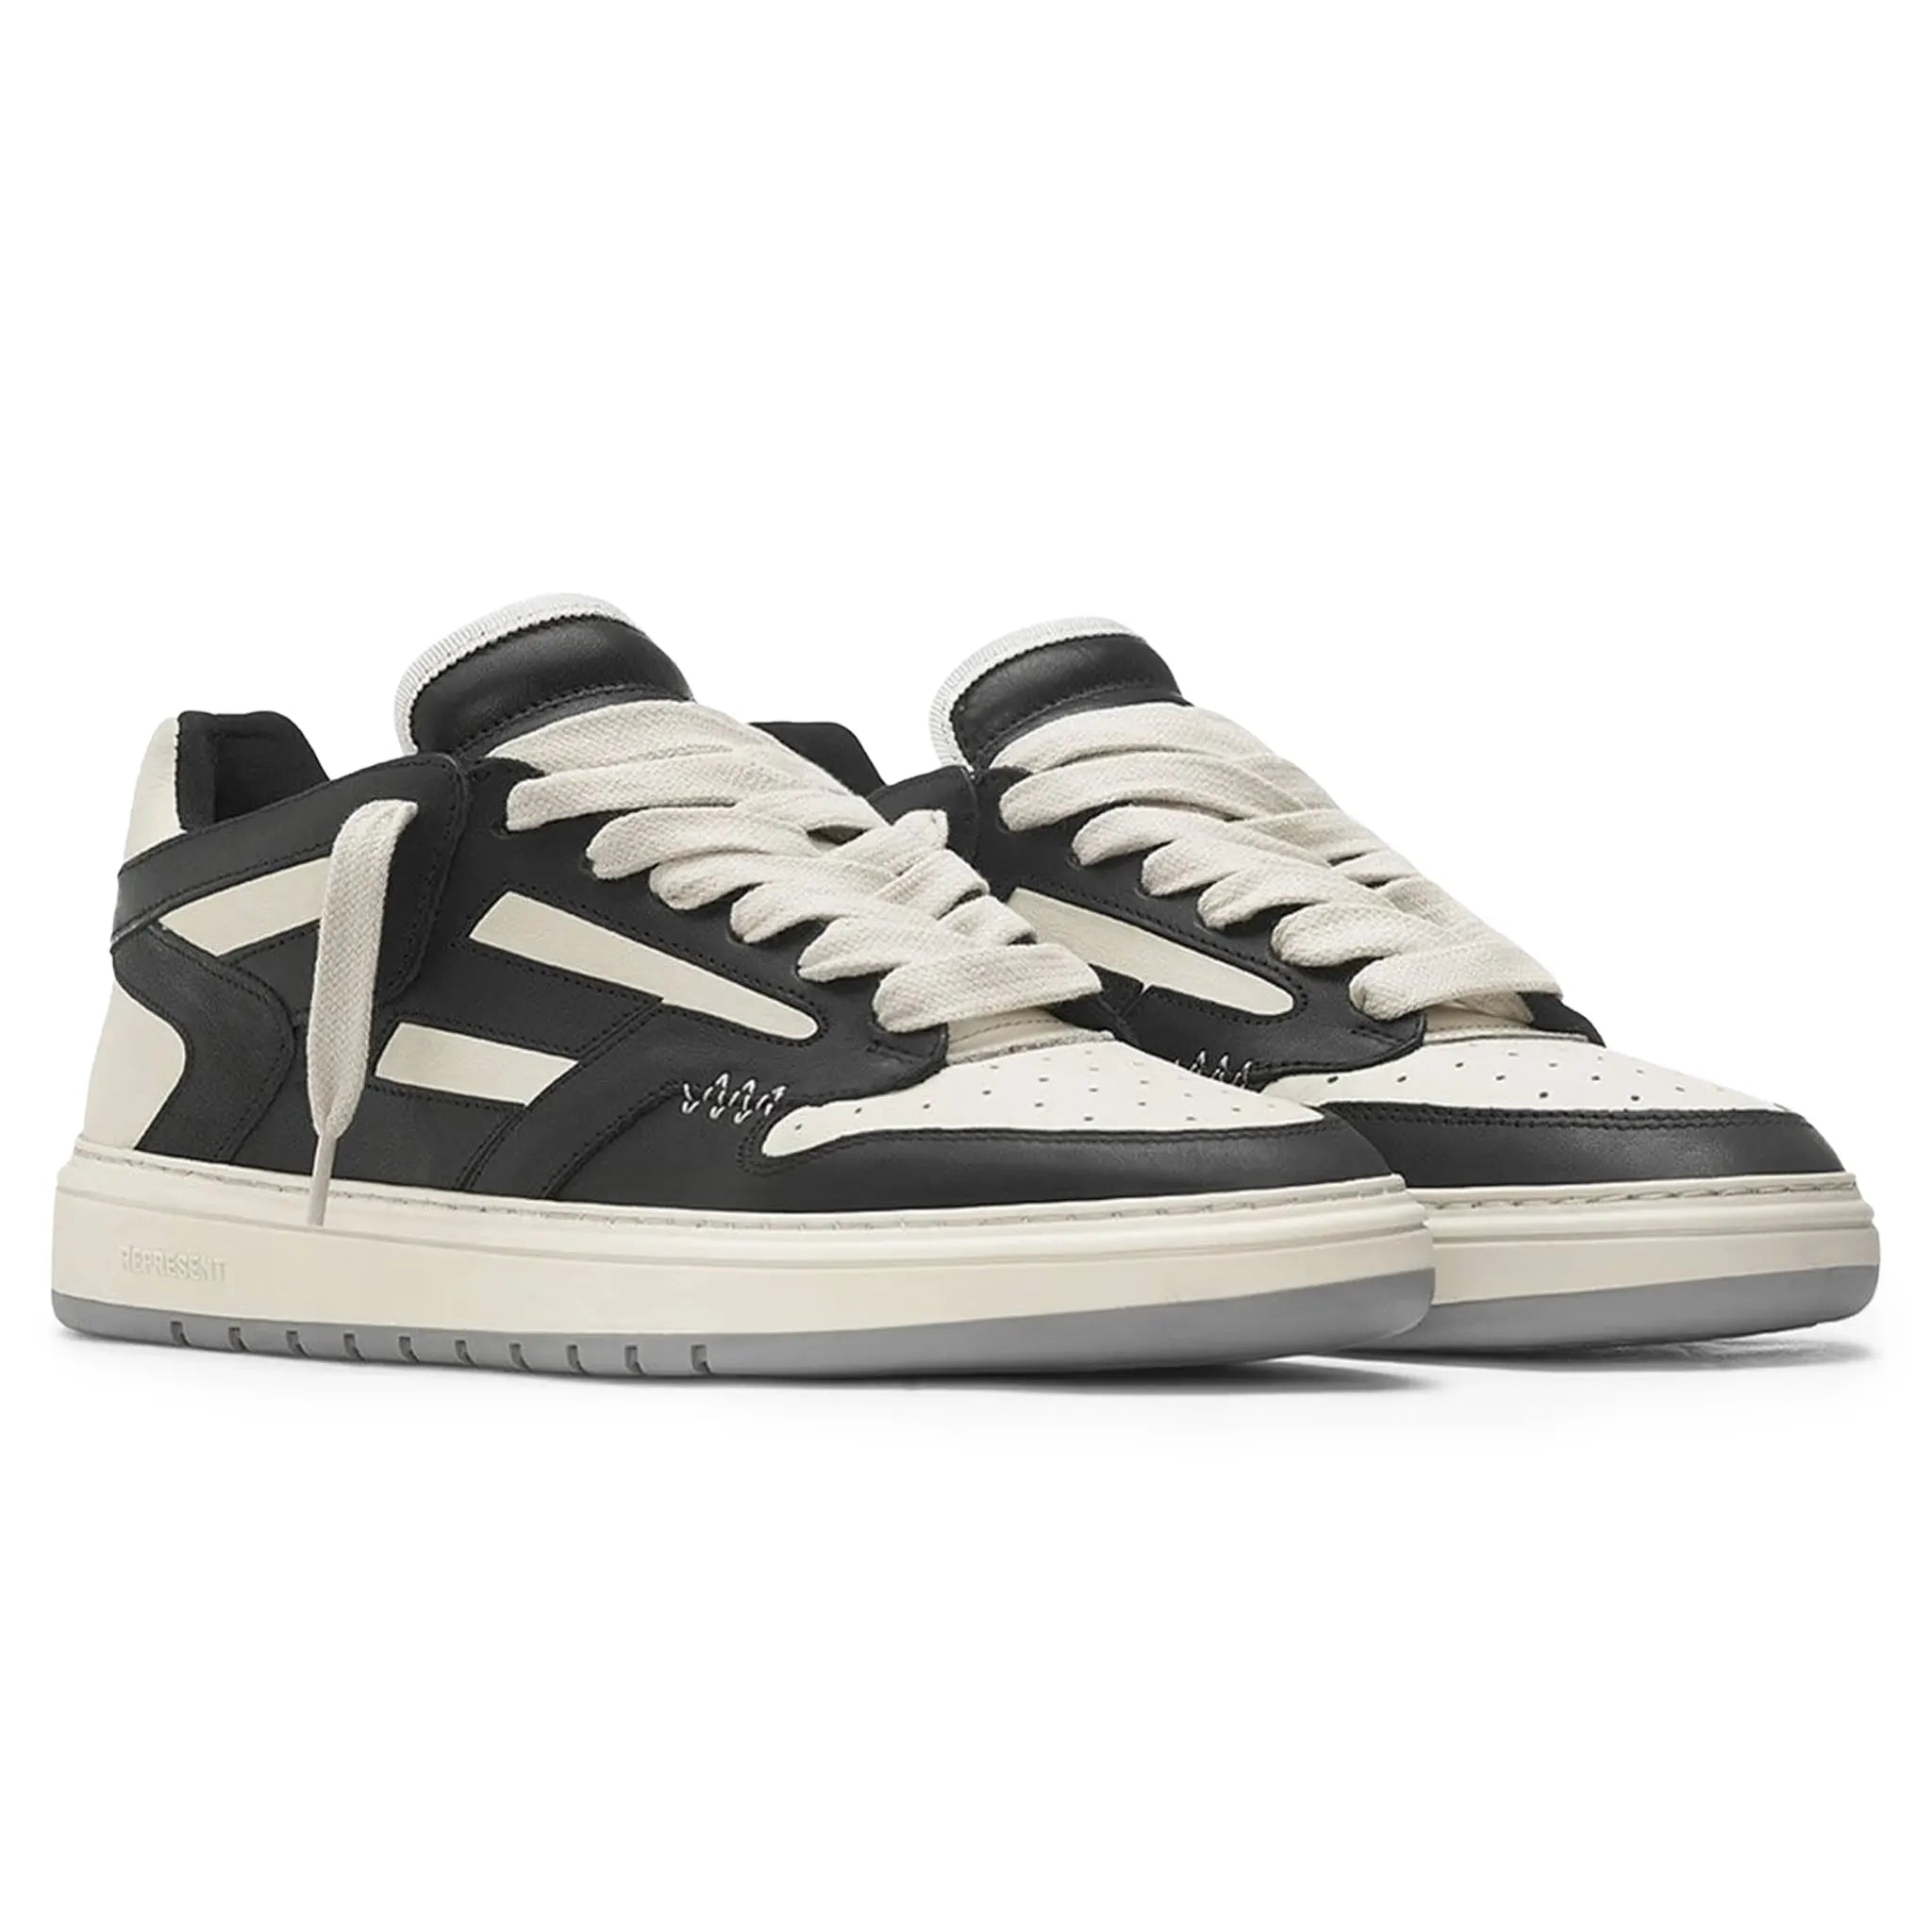 Pair view of Represent Reptor Low Black Vintage White Trainers M12043-037